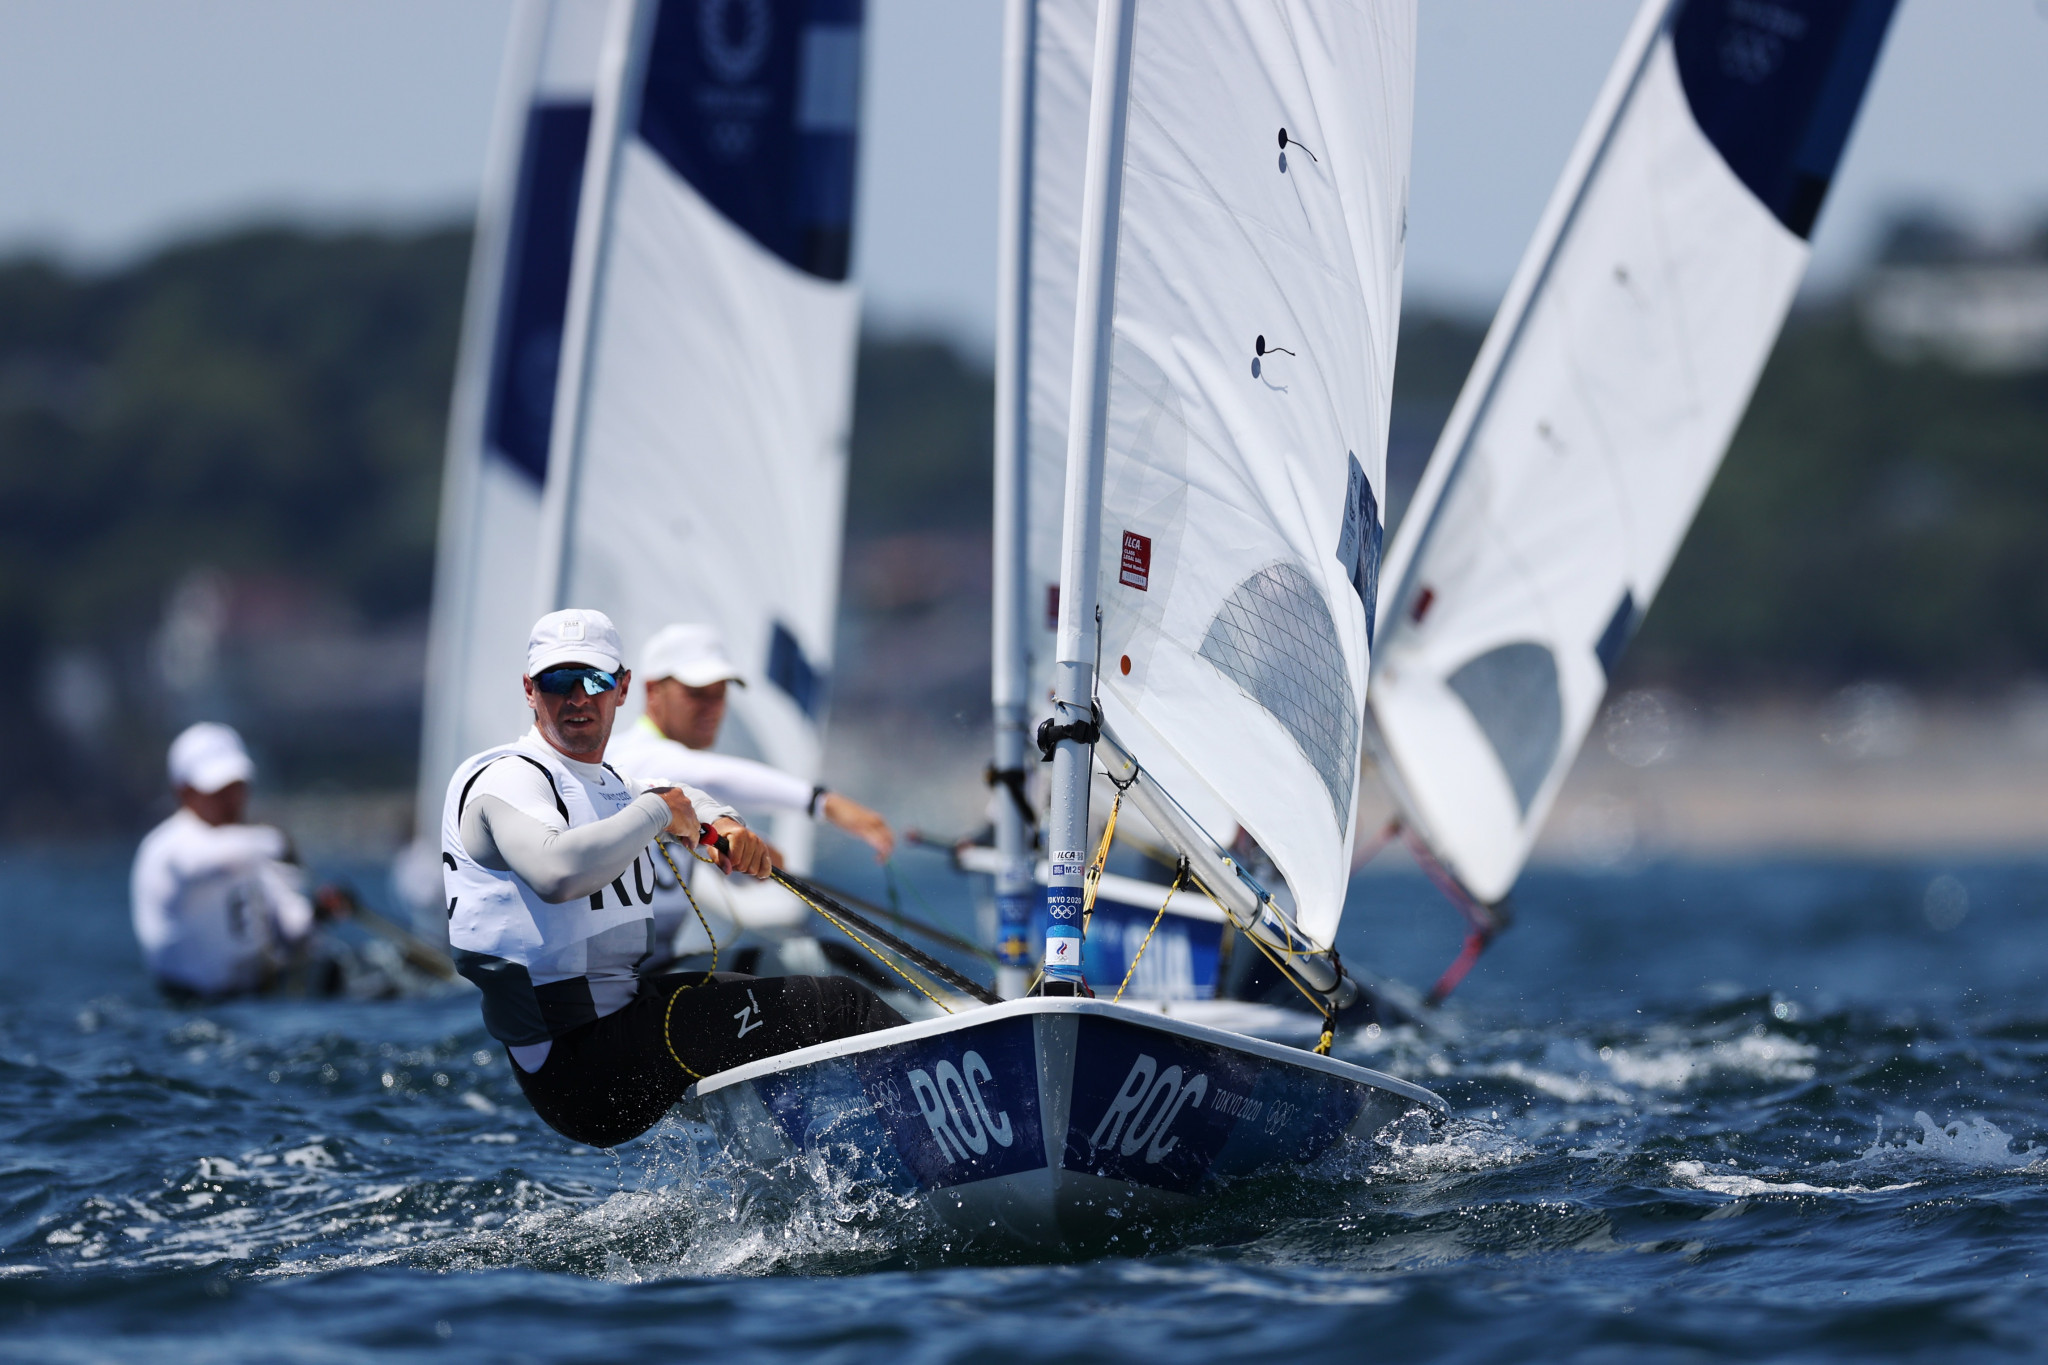 World Sailing has yet to make a decision on the reintroduction of Russian and Belarusian athletes ©Getty Images